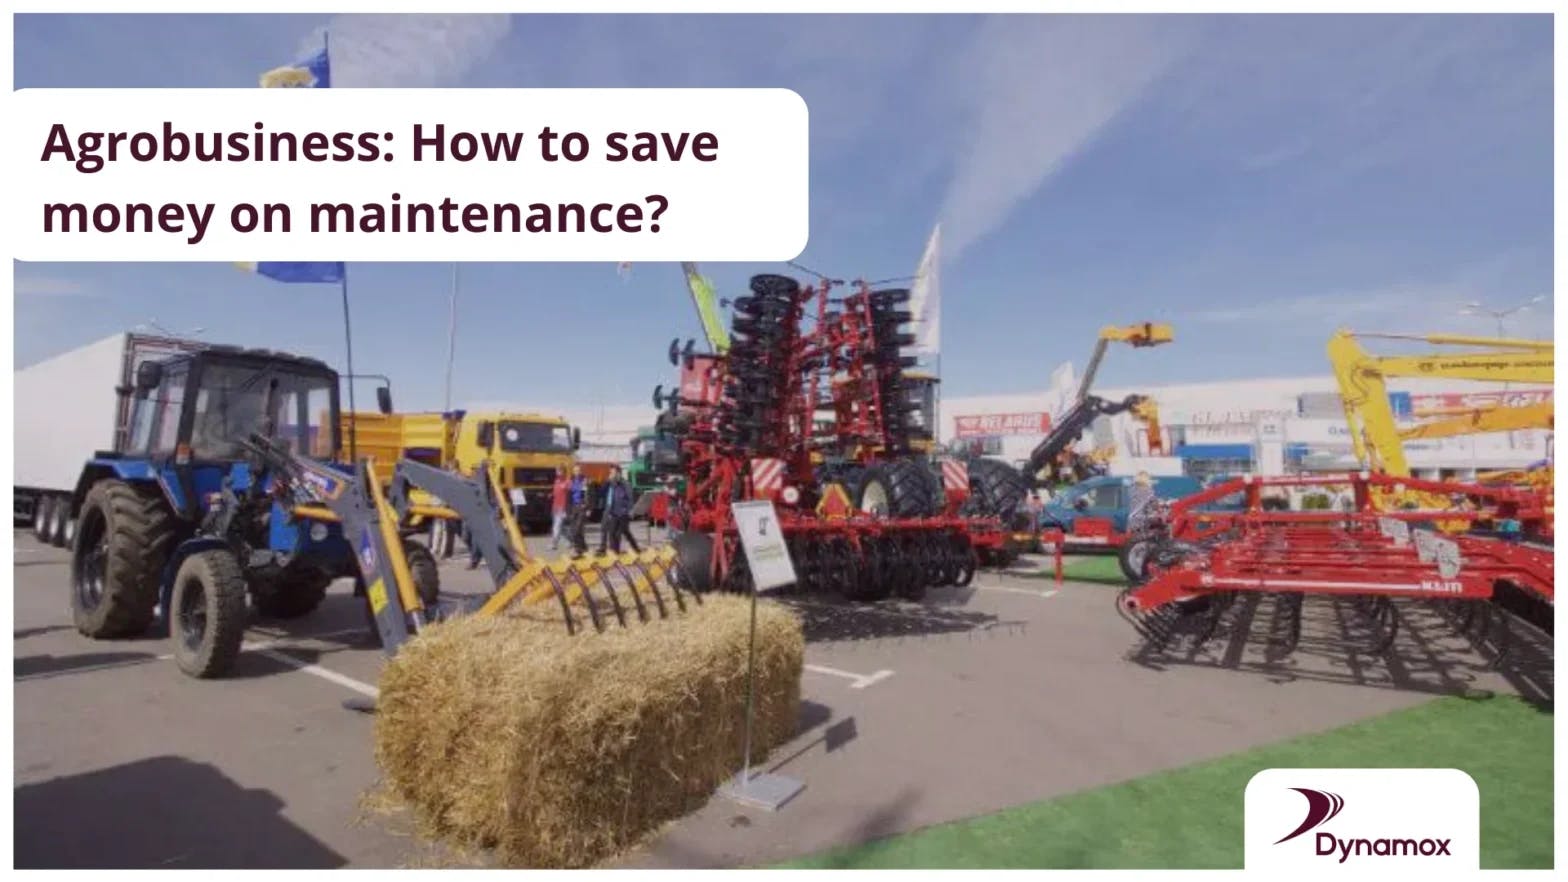 Agribusiness: How to save money on maintenance?